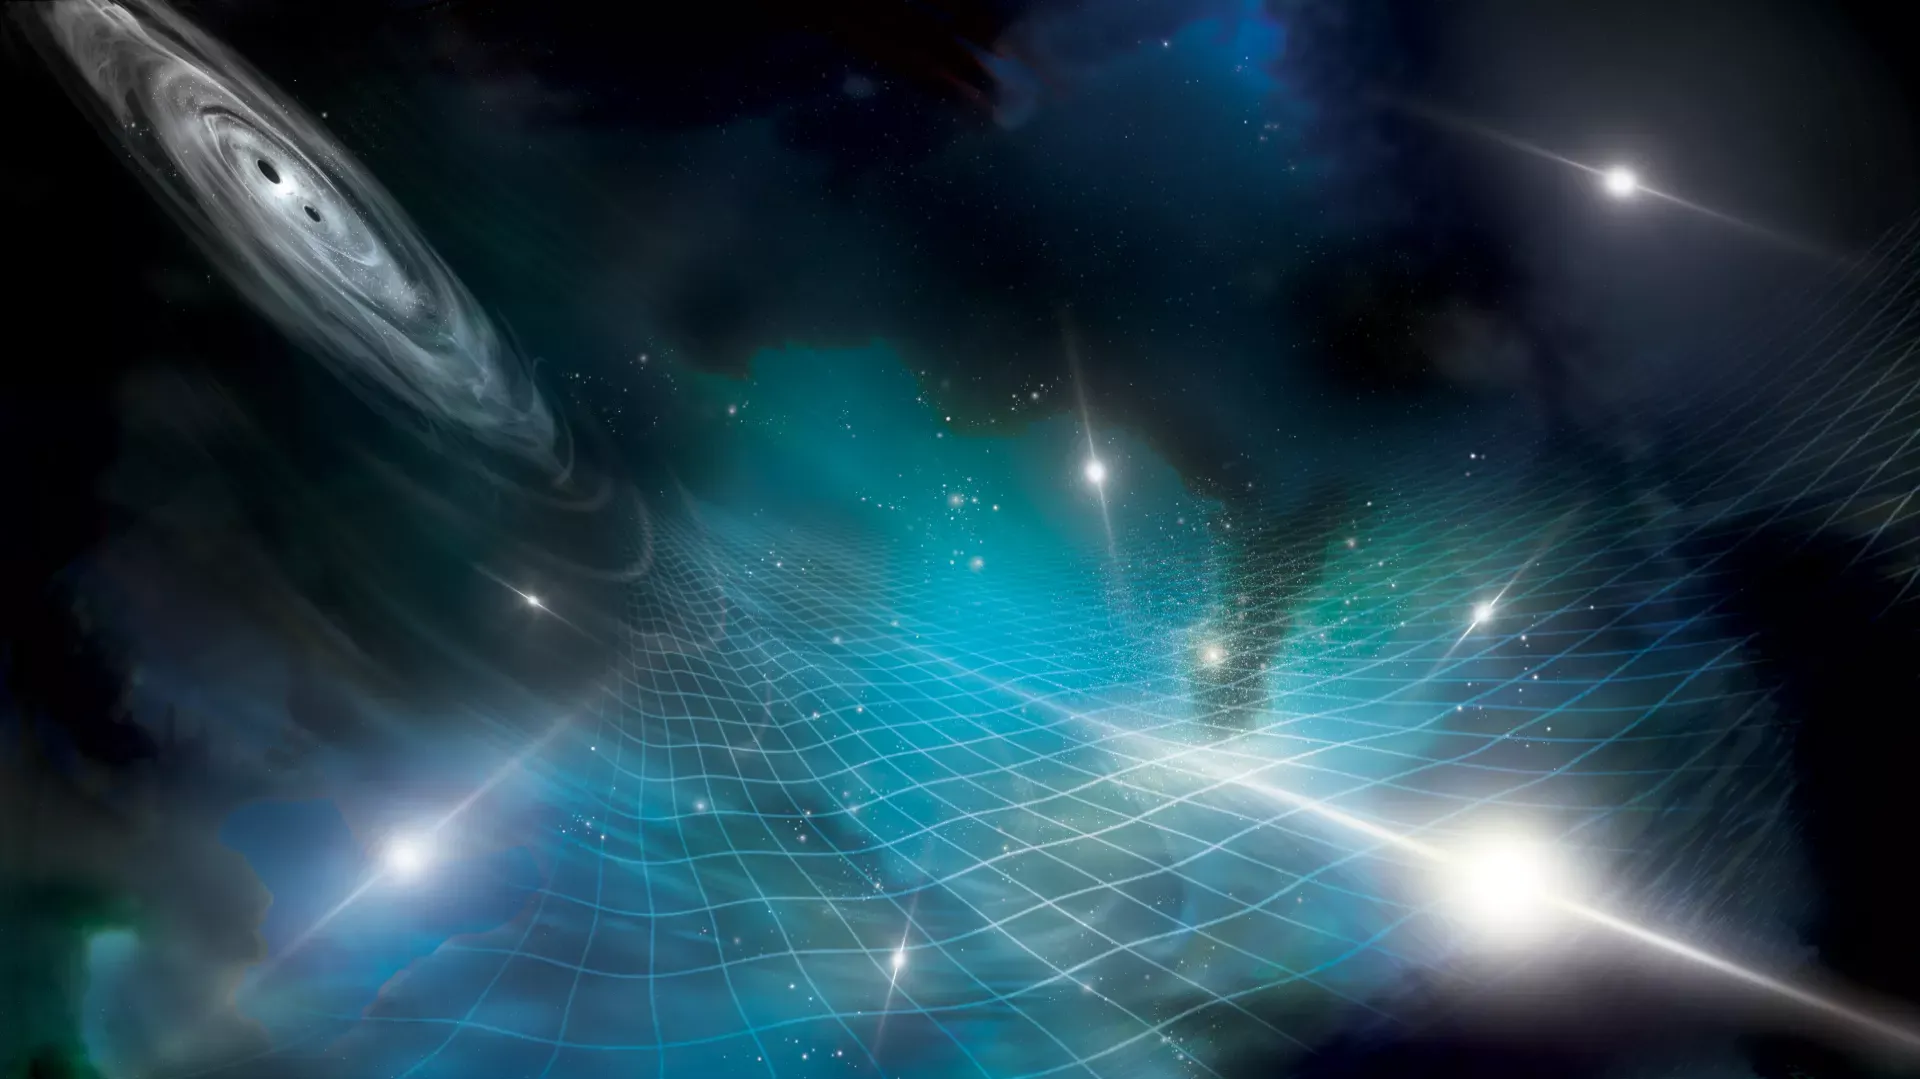 bright points of light spread out throughout space emit a grid-like pattern 